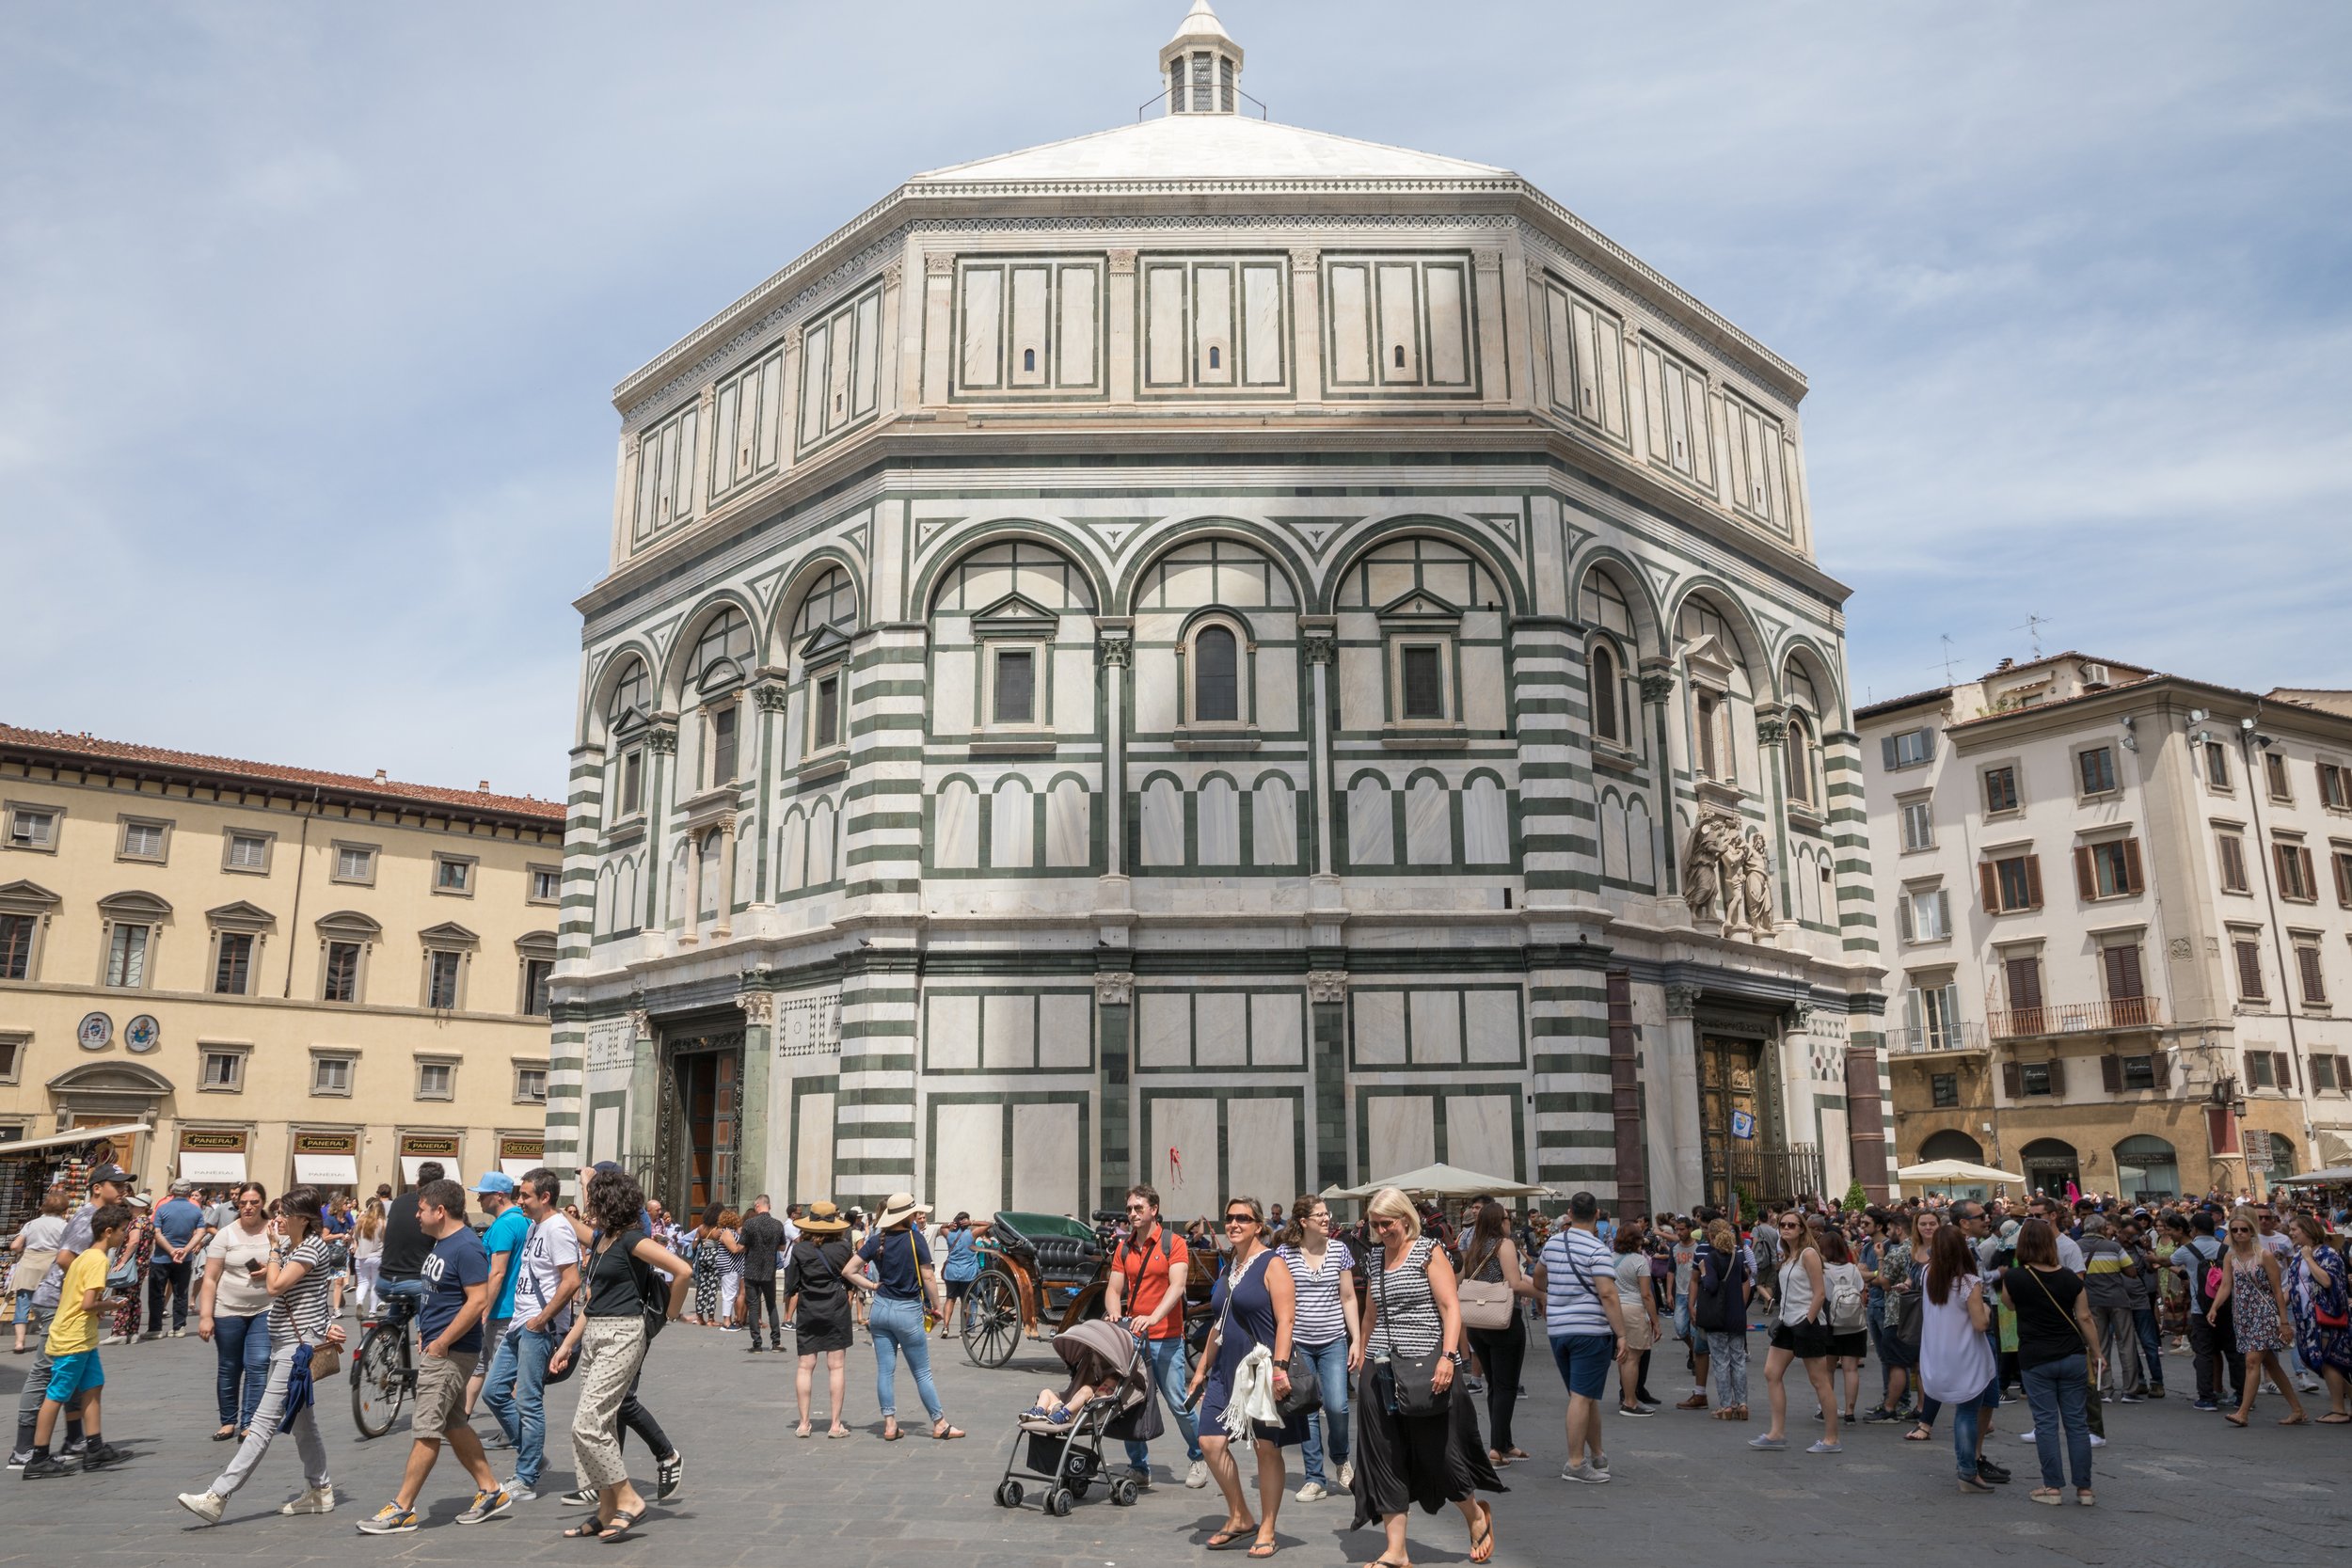 florence-italy-june-24-2018-panoramic-view-exterior-florence-baptistery-battistero-di-san-giovanni-piazza-del-duomo-people-walk-square-summer-day.jpg